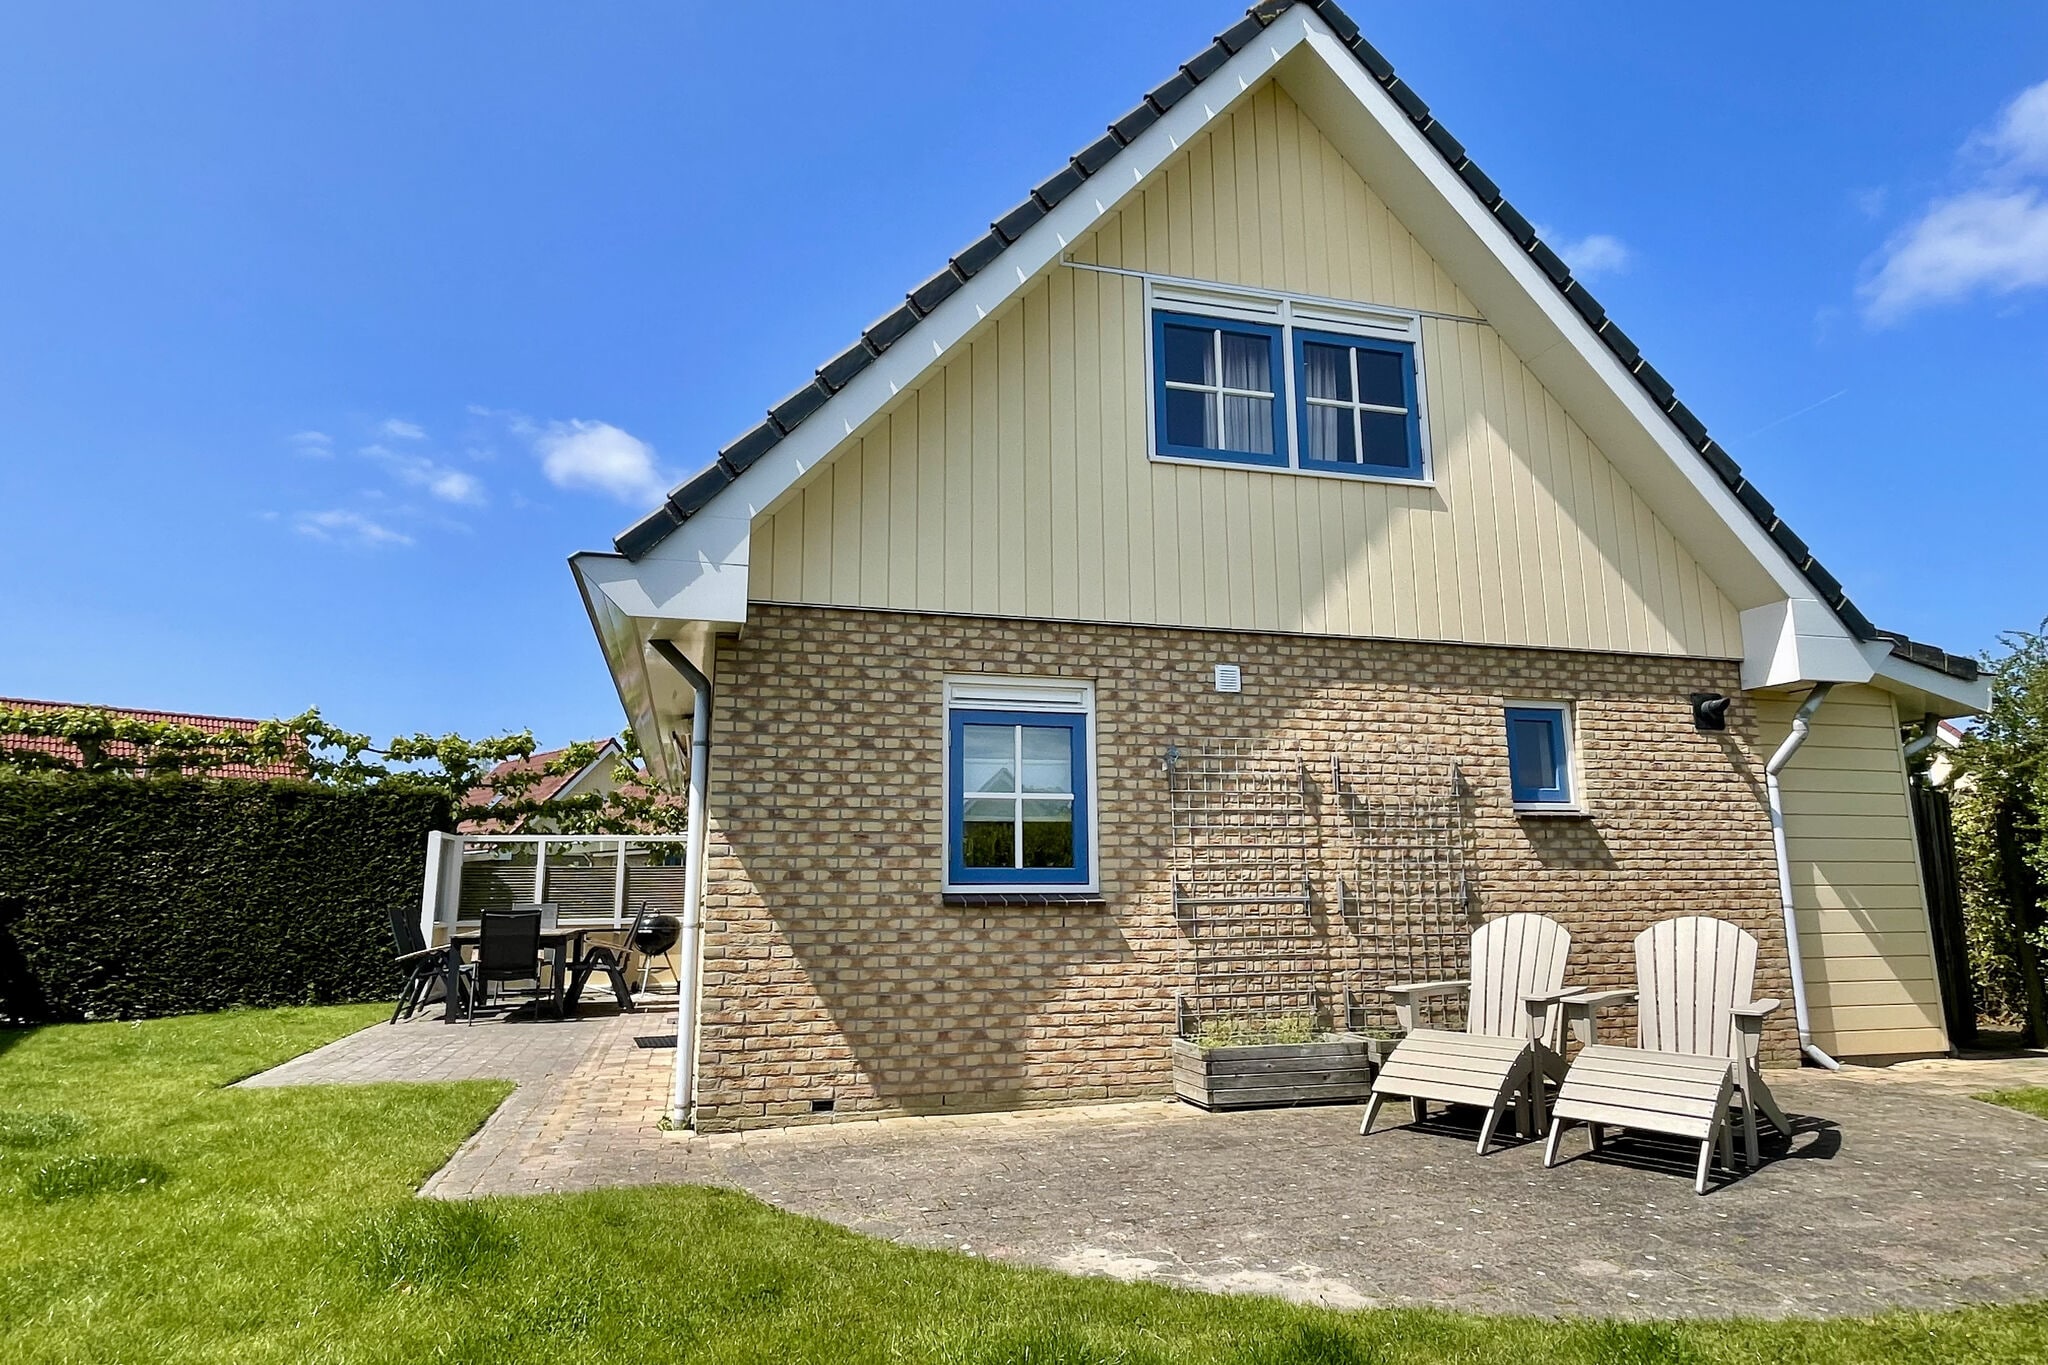 Attractive, detached holiday home in small-scale holiday park